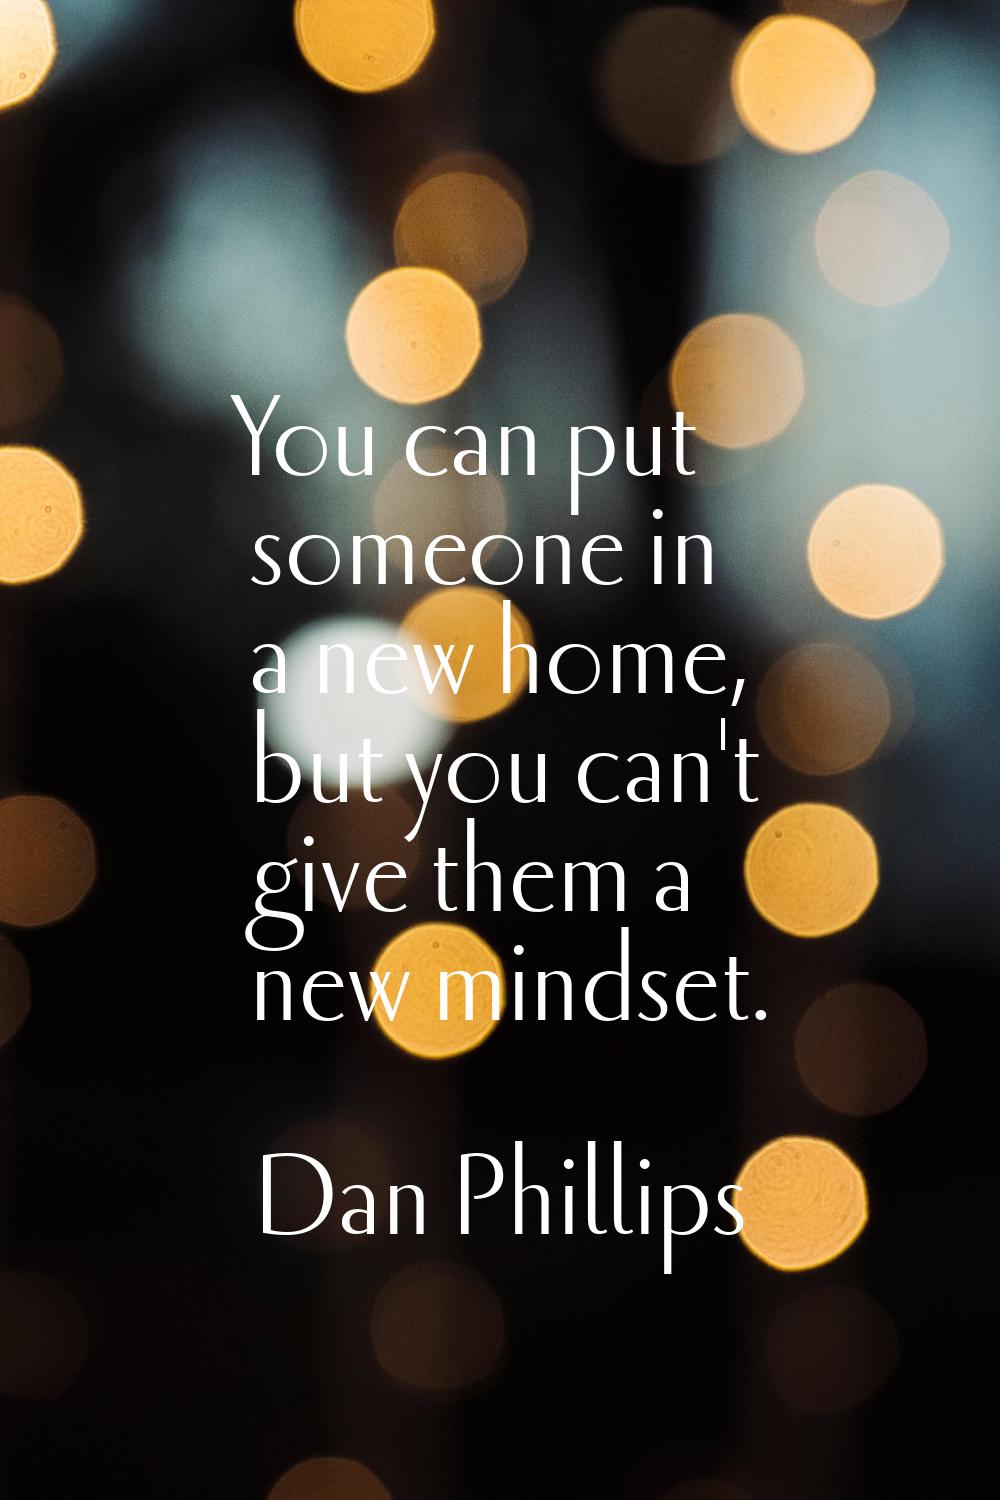 You can put someone in a new home, but you can't give them a new mindset.